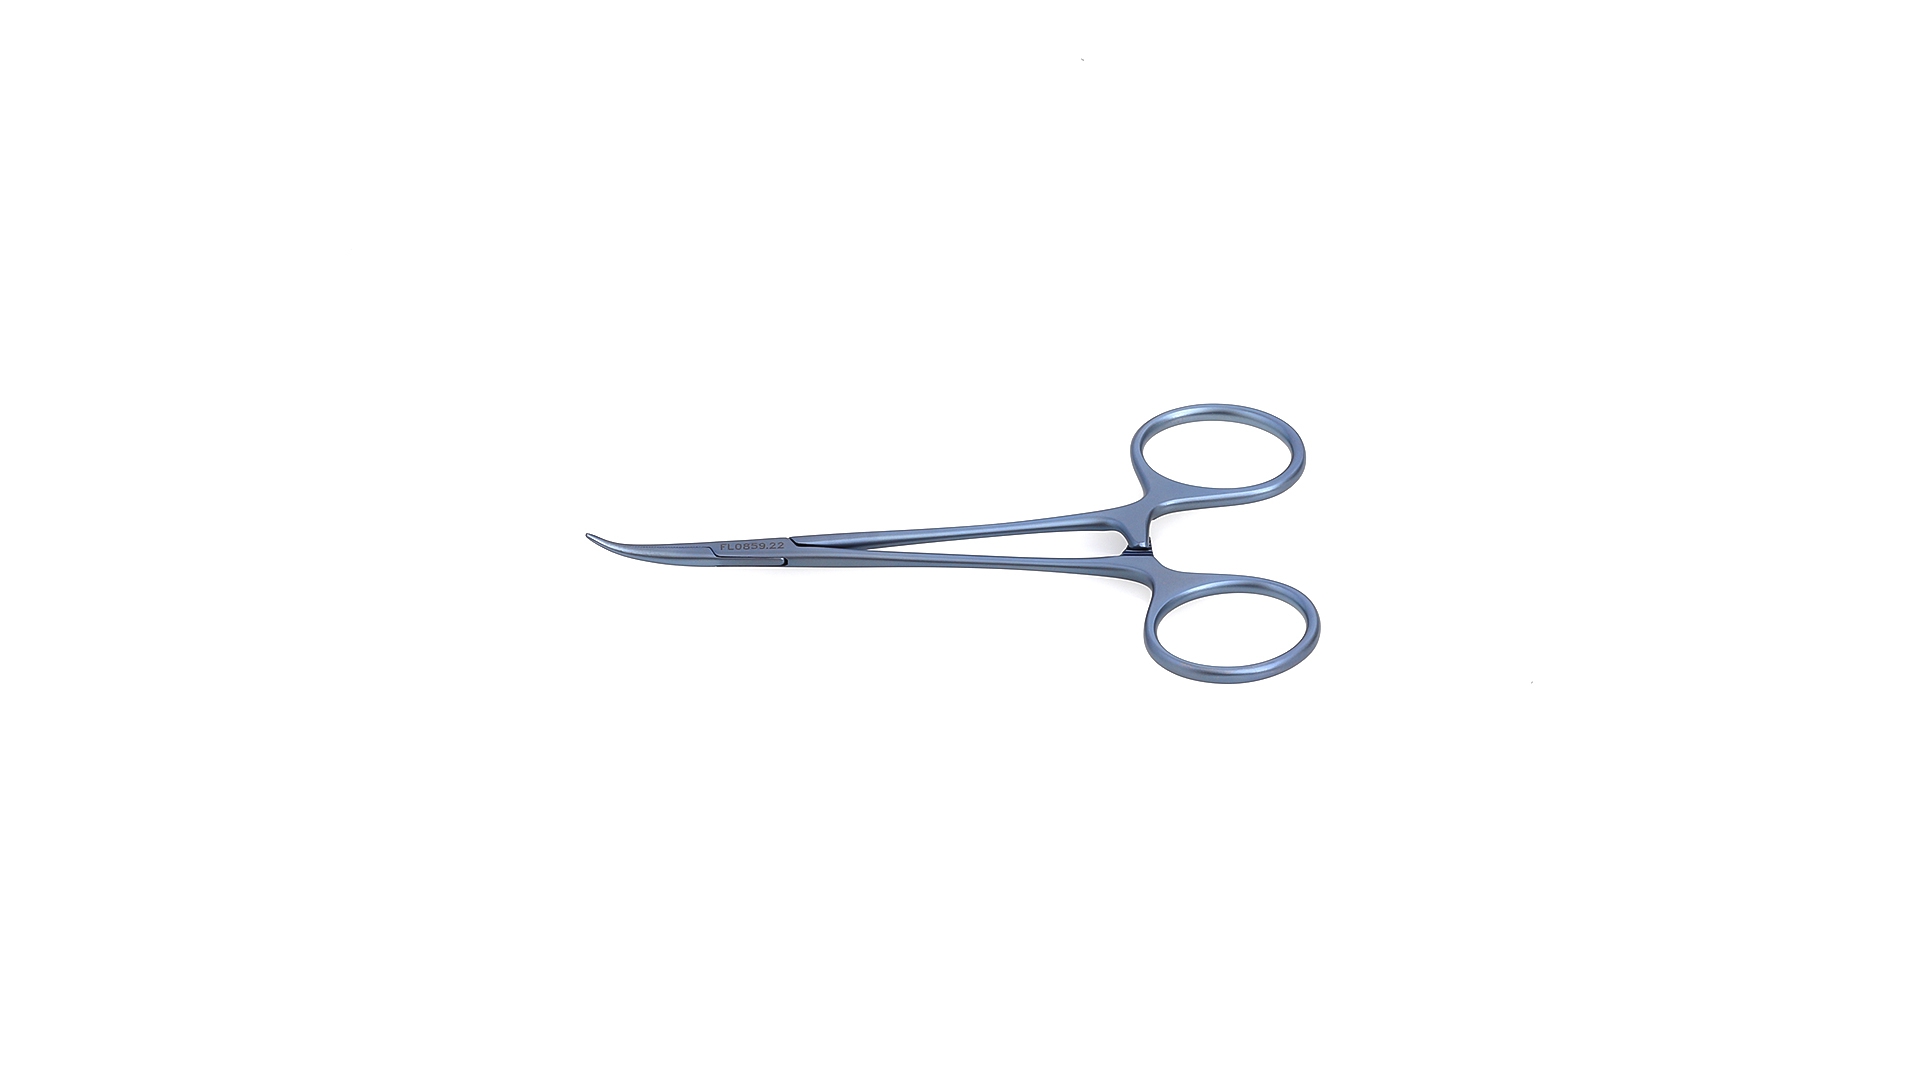 Halstead-Baby Forceps - Curved serrated jaws